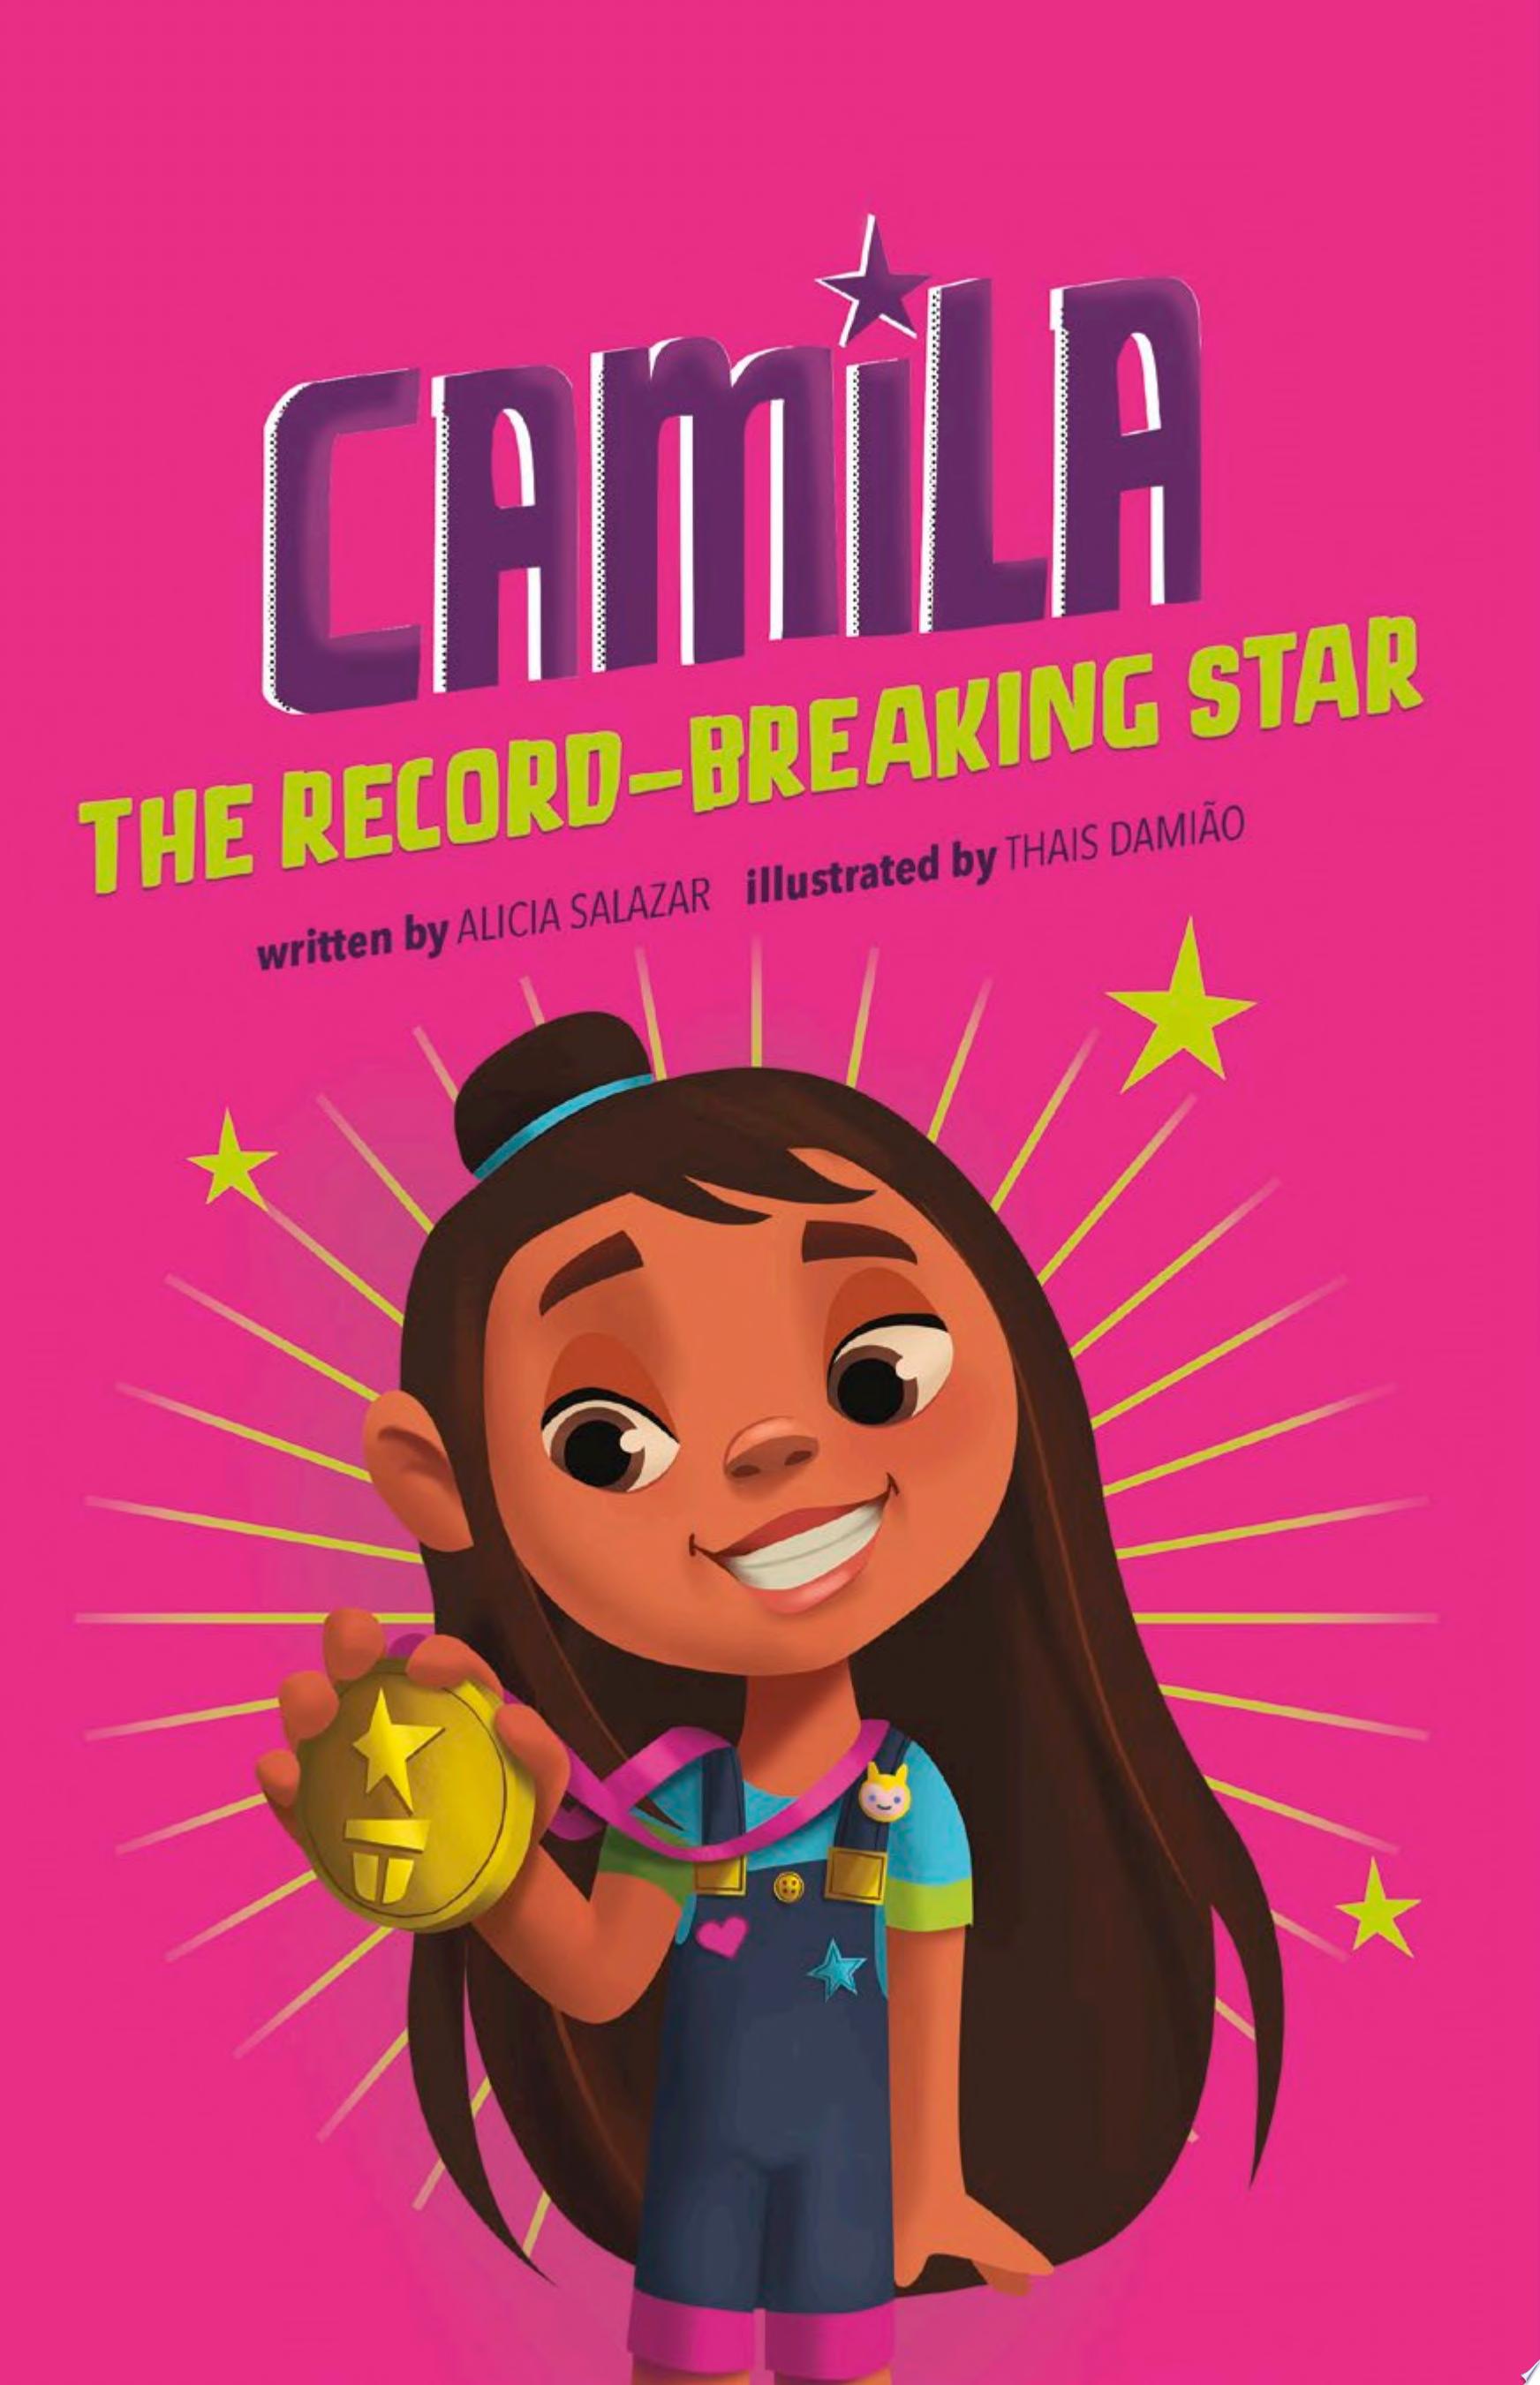 Image for "Camila the Record-Breaking Star"